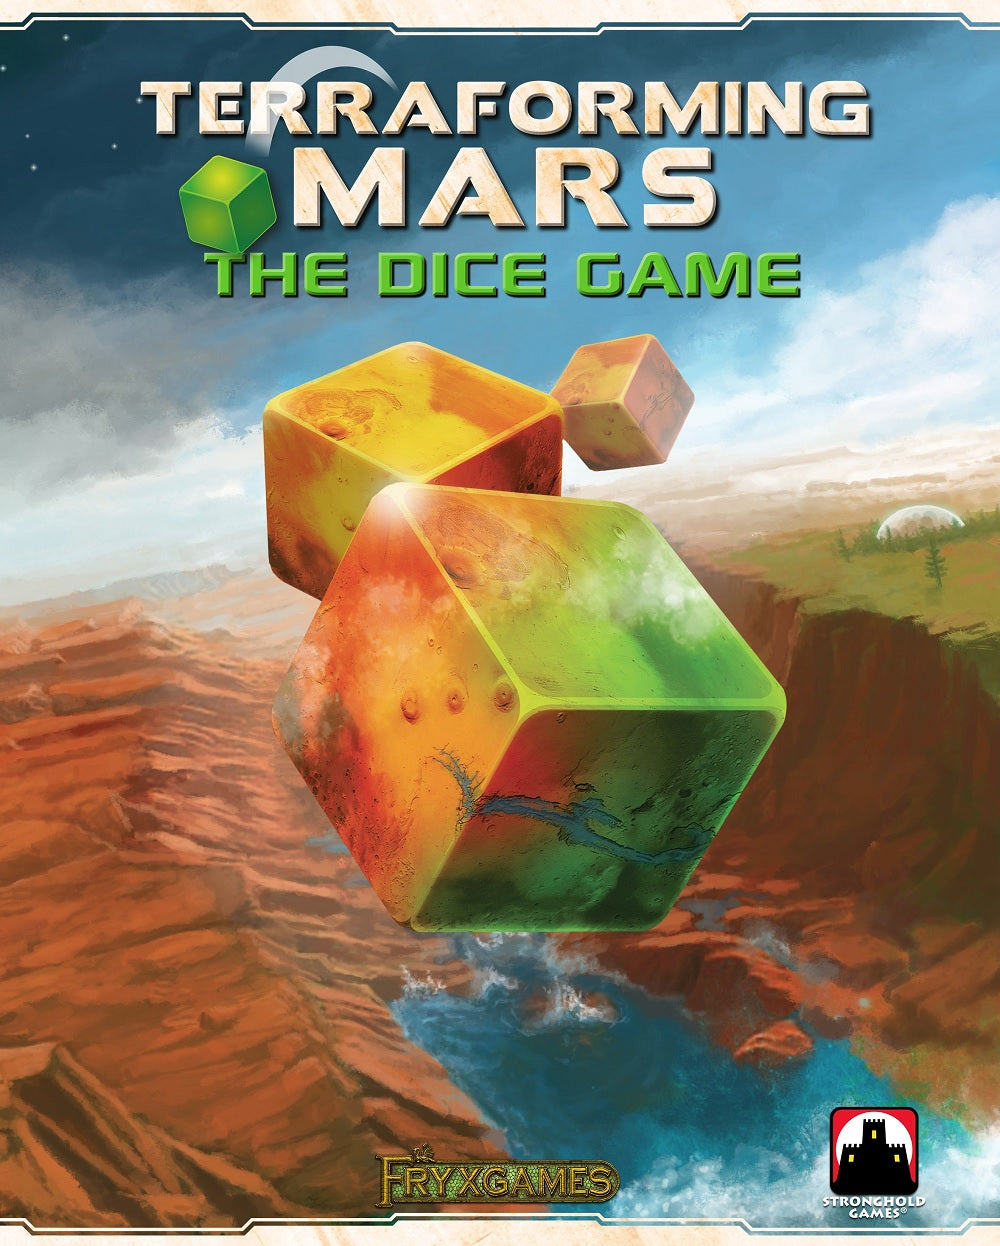 Is Terraforming Mars Ethical? - The Debrief